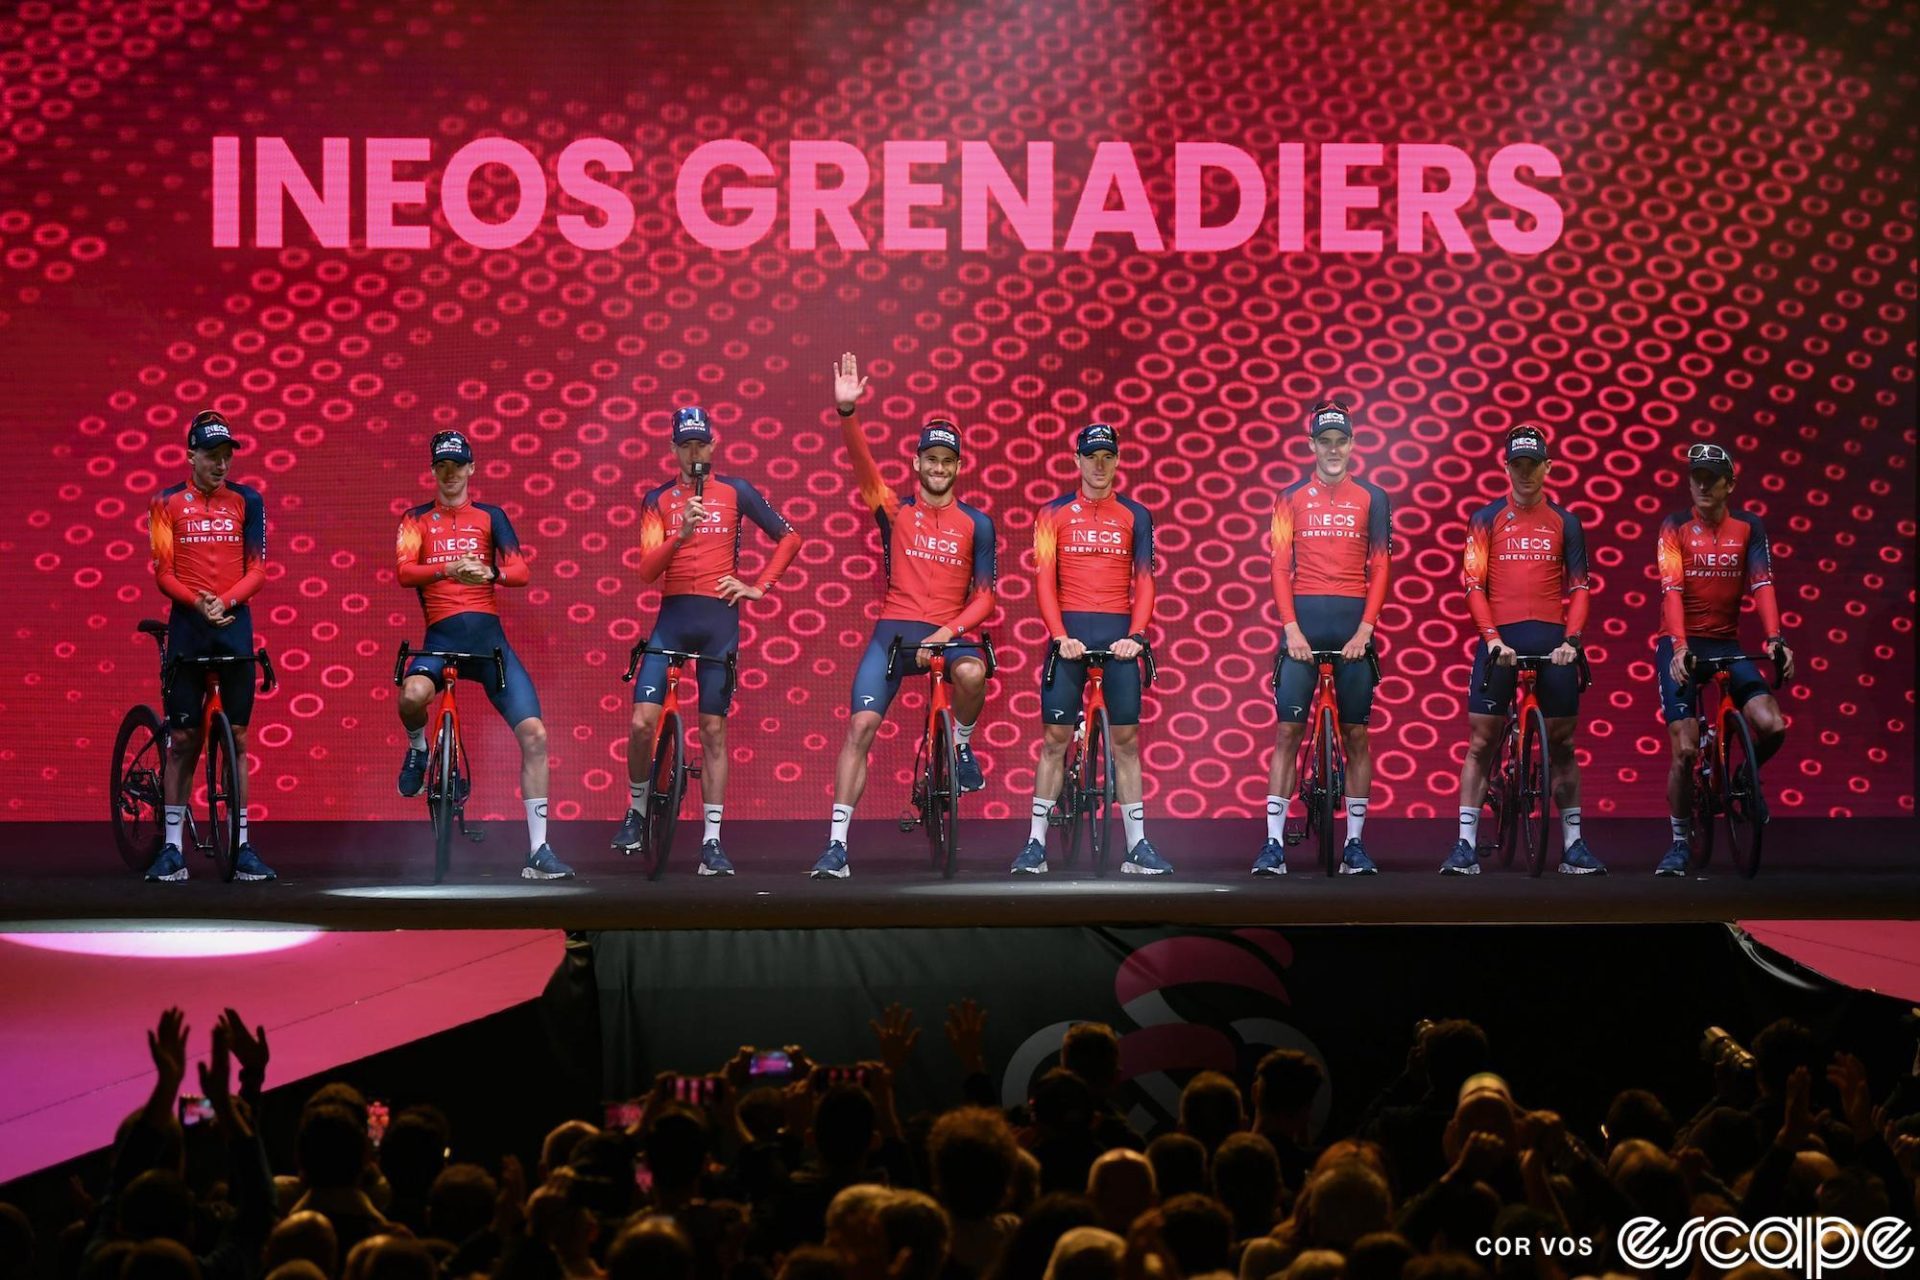 The Ineos Grenadiers team is shown at the 2023 Giro d'Italia teams presentation. The eight riders are on stage, flanked around Italian star Filippo Ganna at center. At far left is Tao Geoghegan Hart, the 2020 Giro winner, and Geraint Thomas is far right. Of the eight riders shown, two are confirmed to be leaving, and three others may.